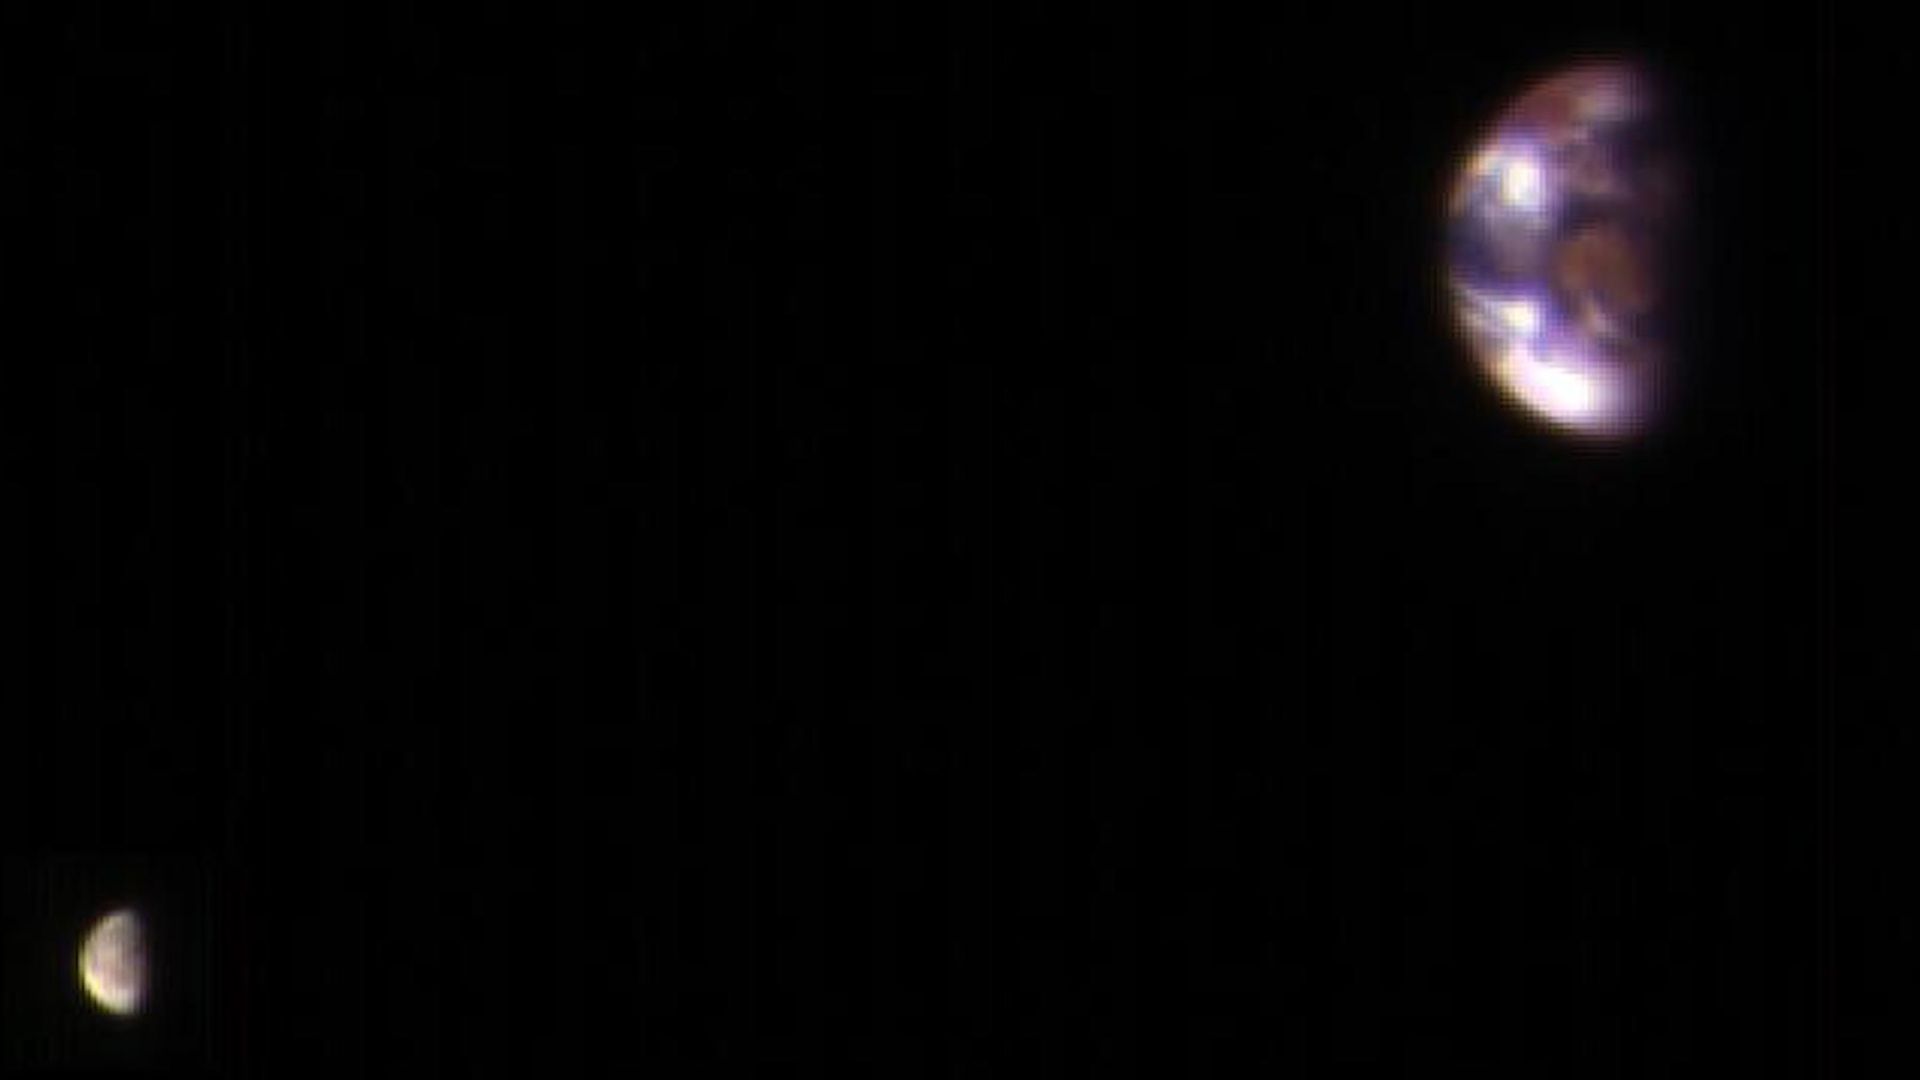 Earth and the Moon seen as blurry, colorful dots from Mars